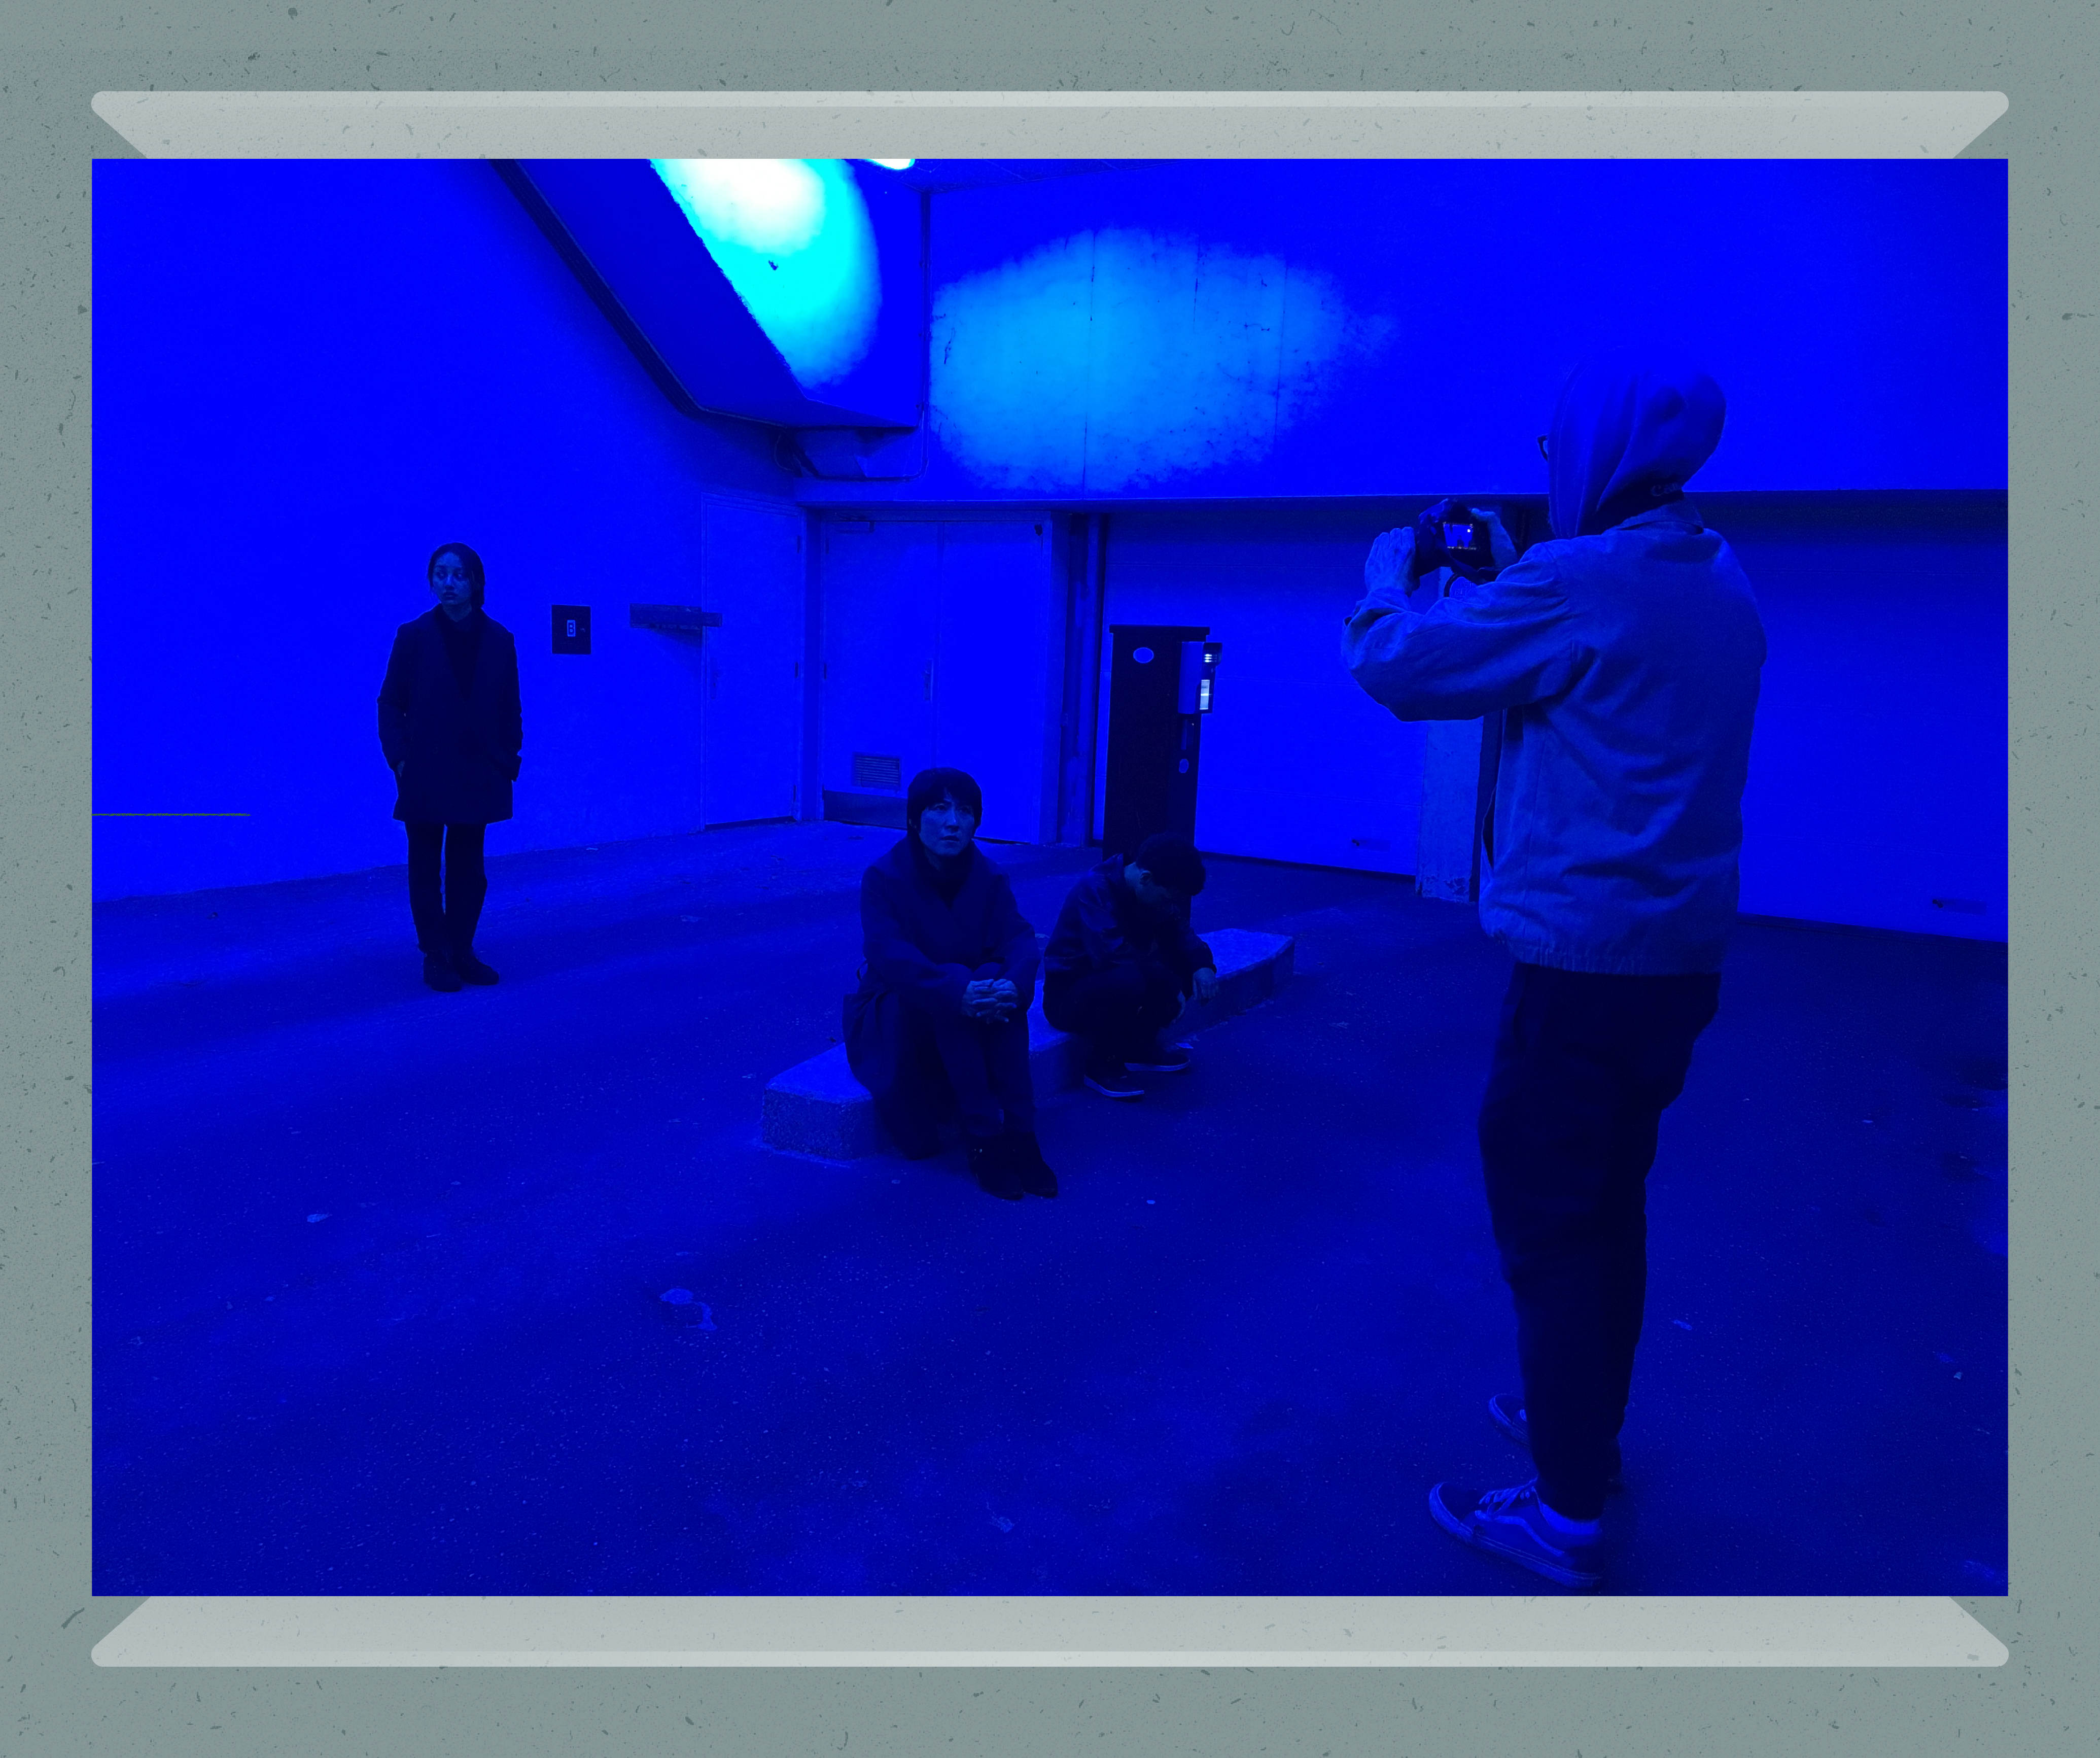 A behind-the-scenes of shooting the film in a location using only blue light